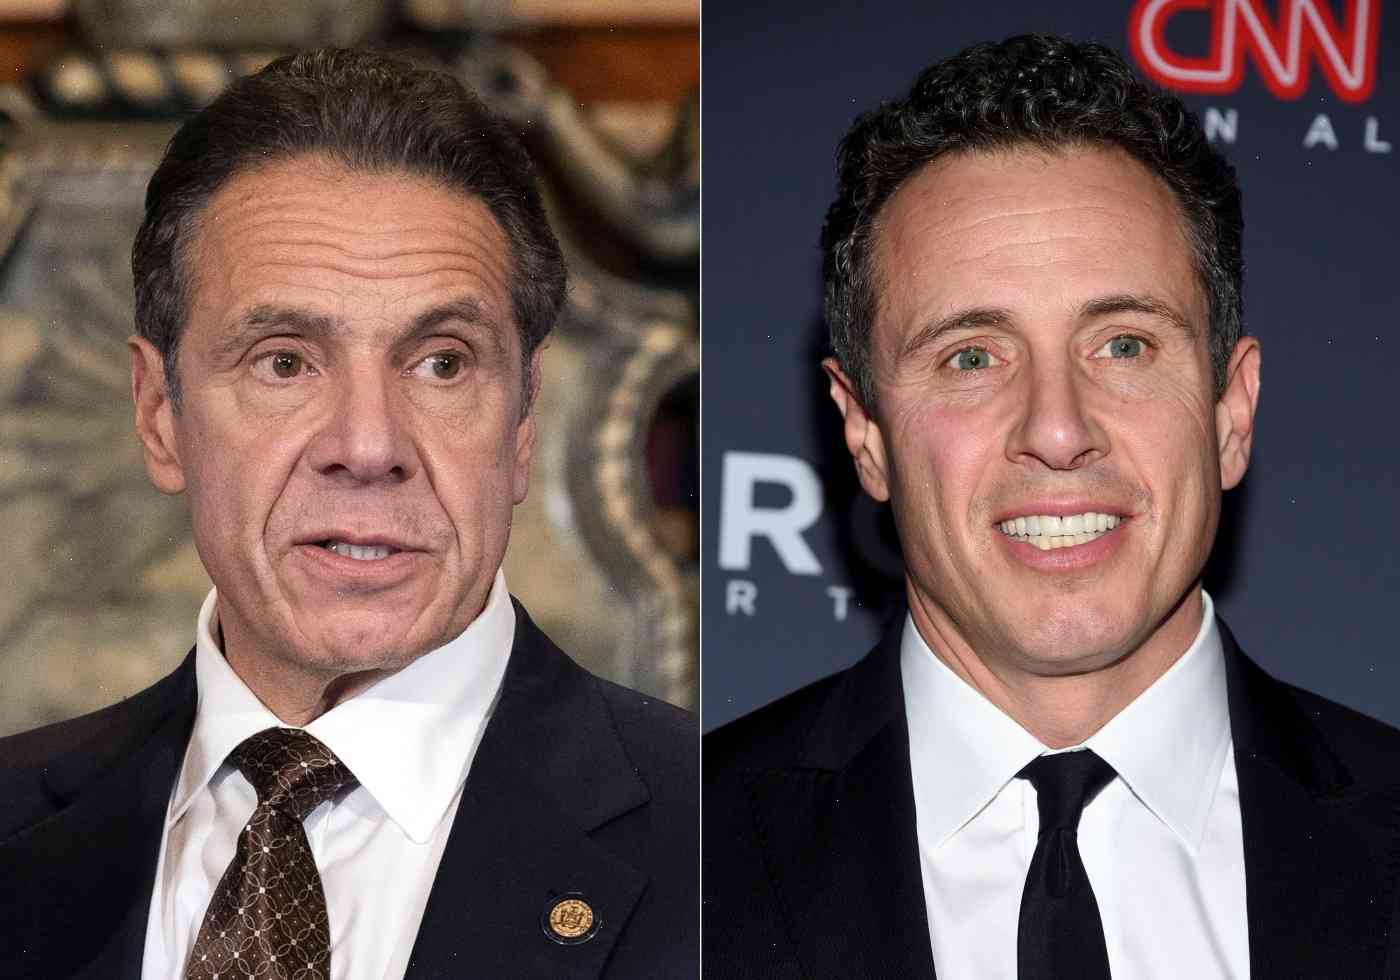 CNN anchor Chris Cuomo suspended amid the scandal over his brother’s shady dealings with donors